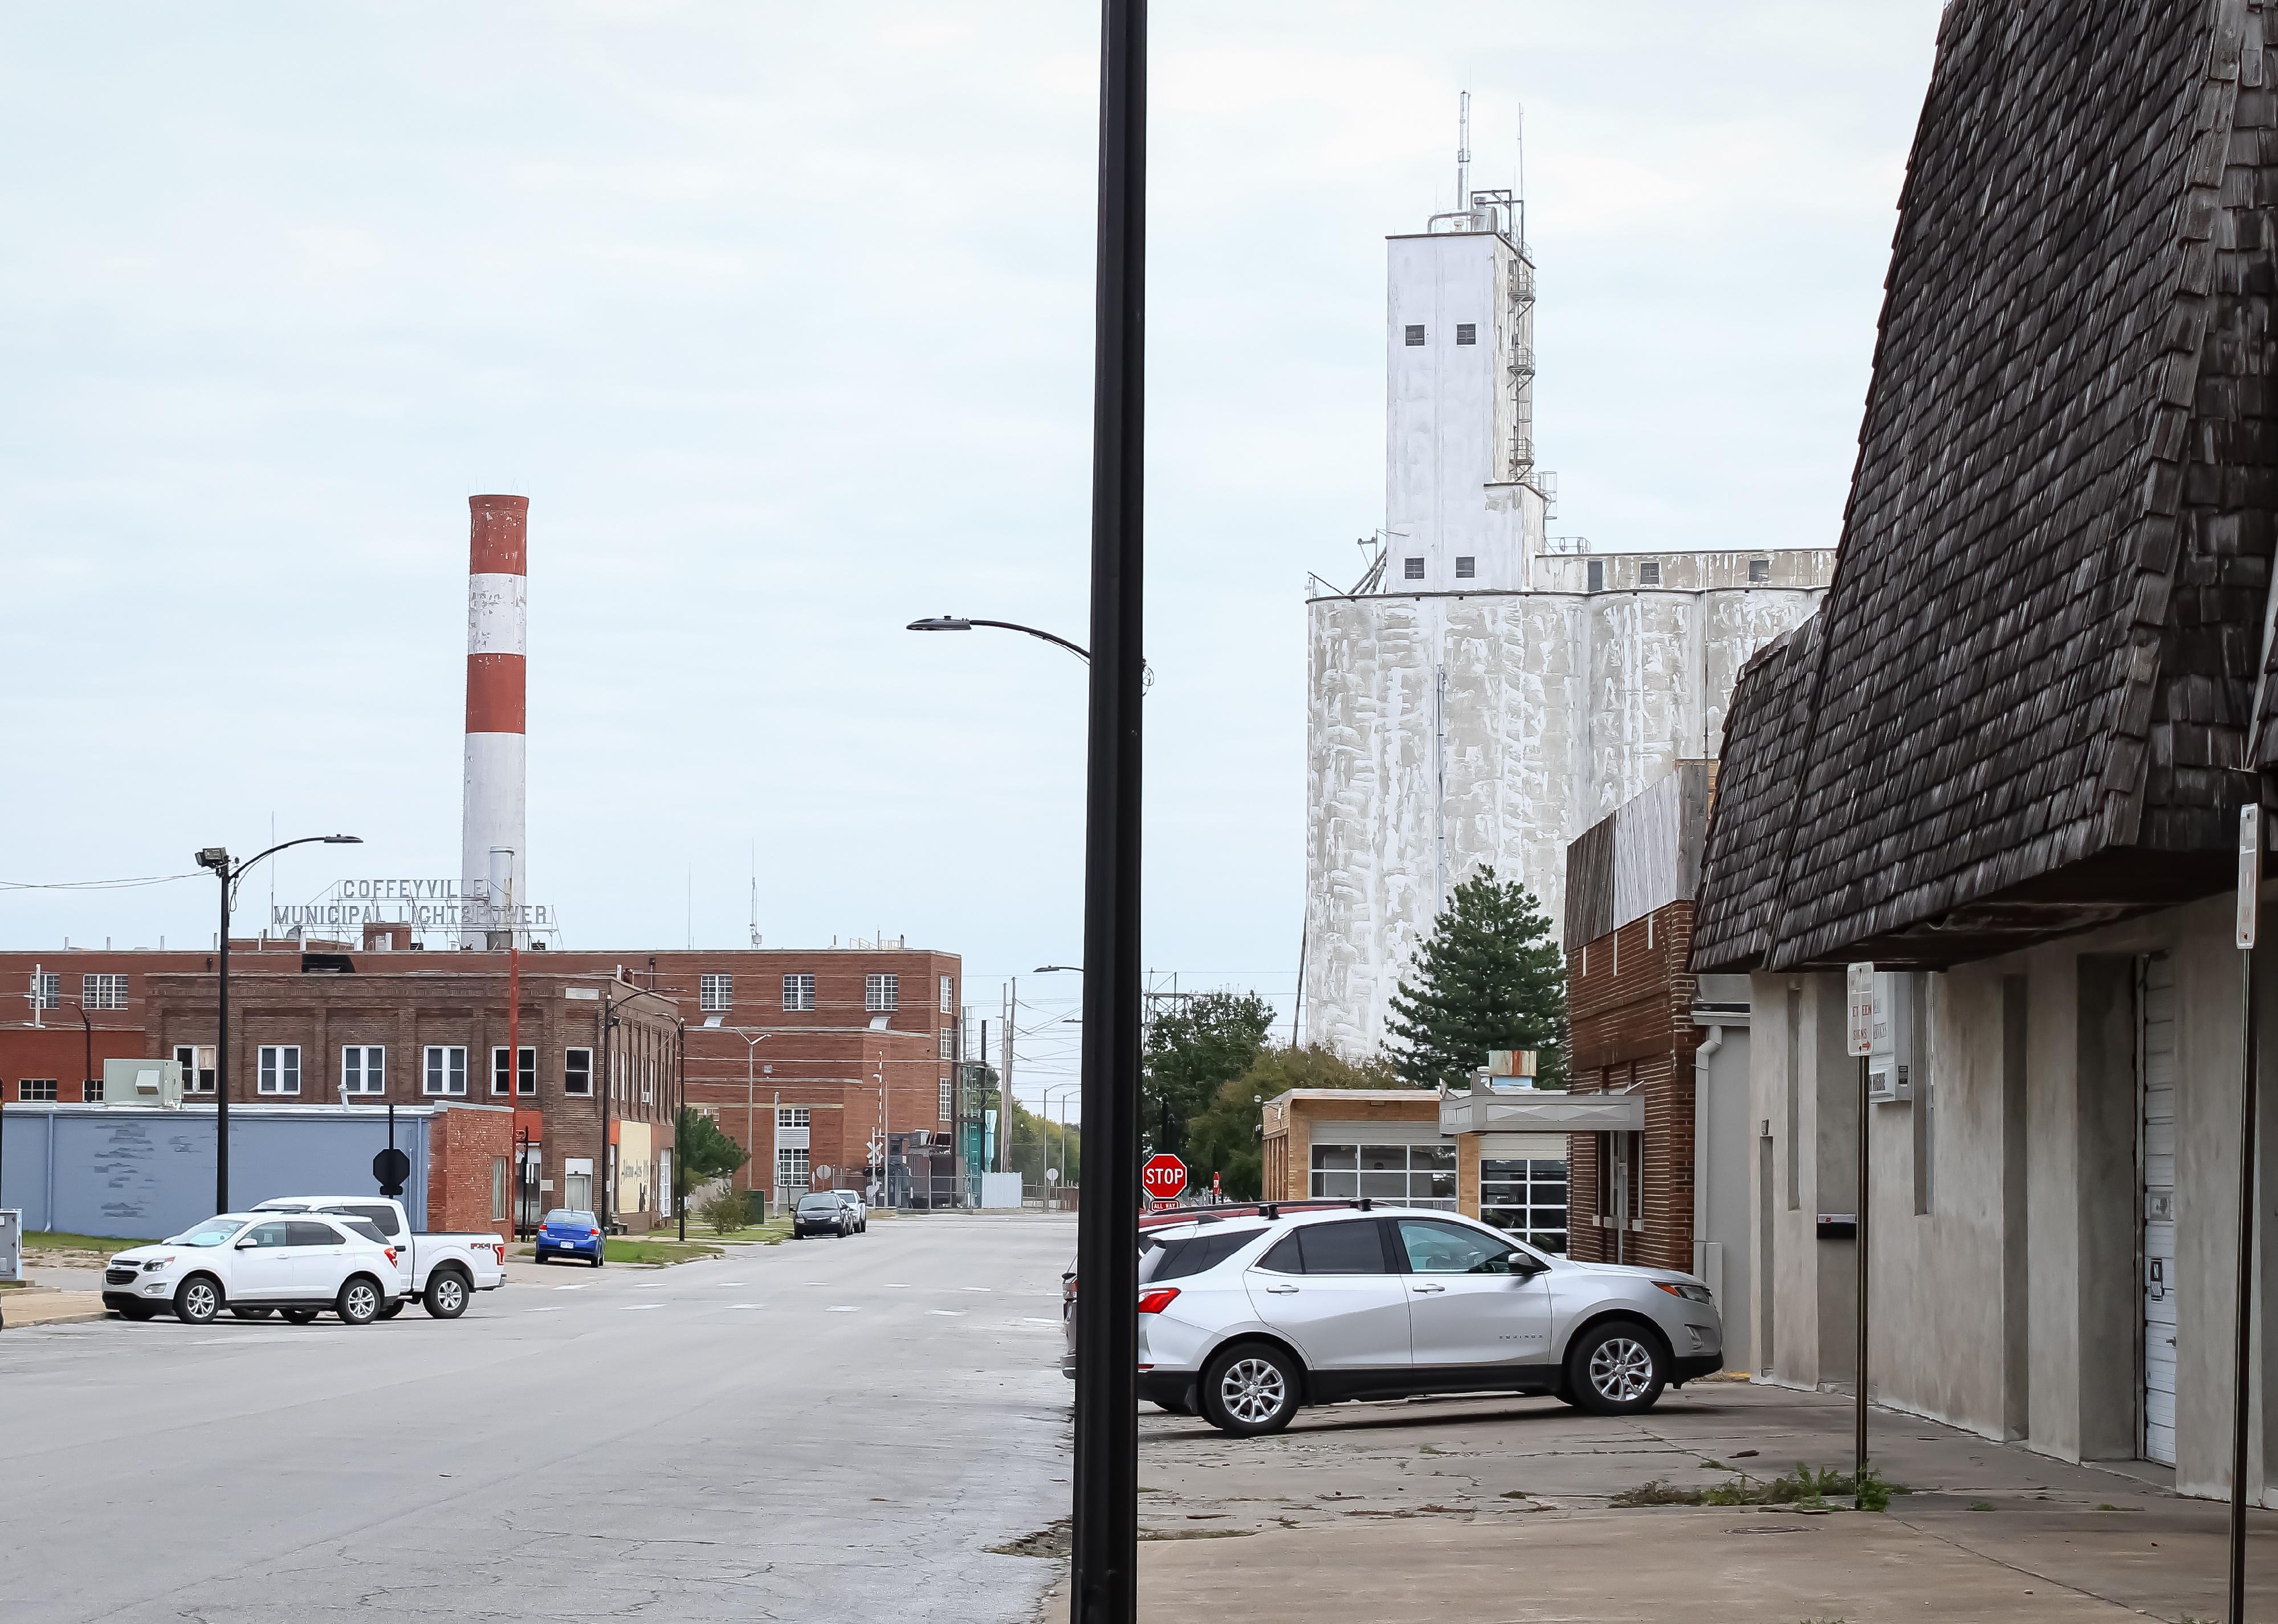 The townscape of Coffeyville with a grain elevator and a power plant.